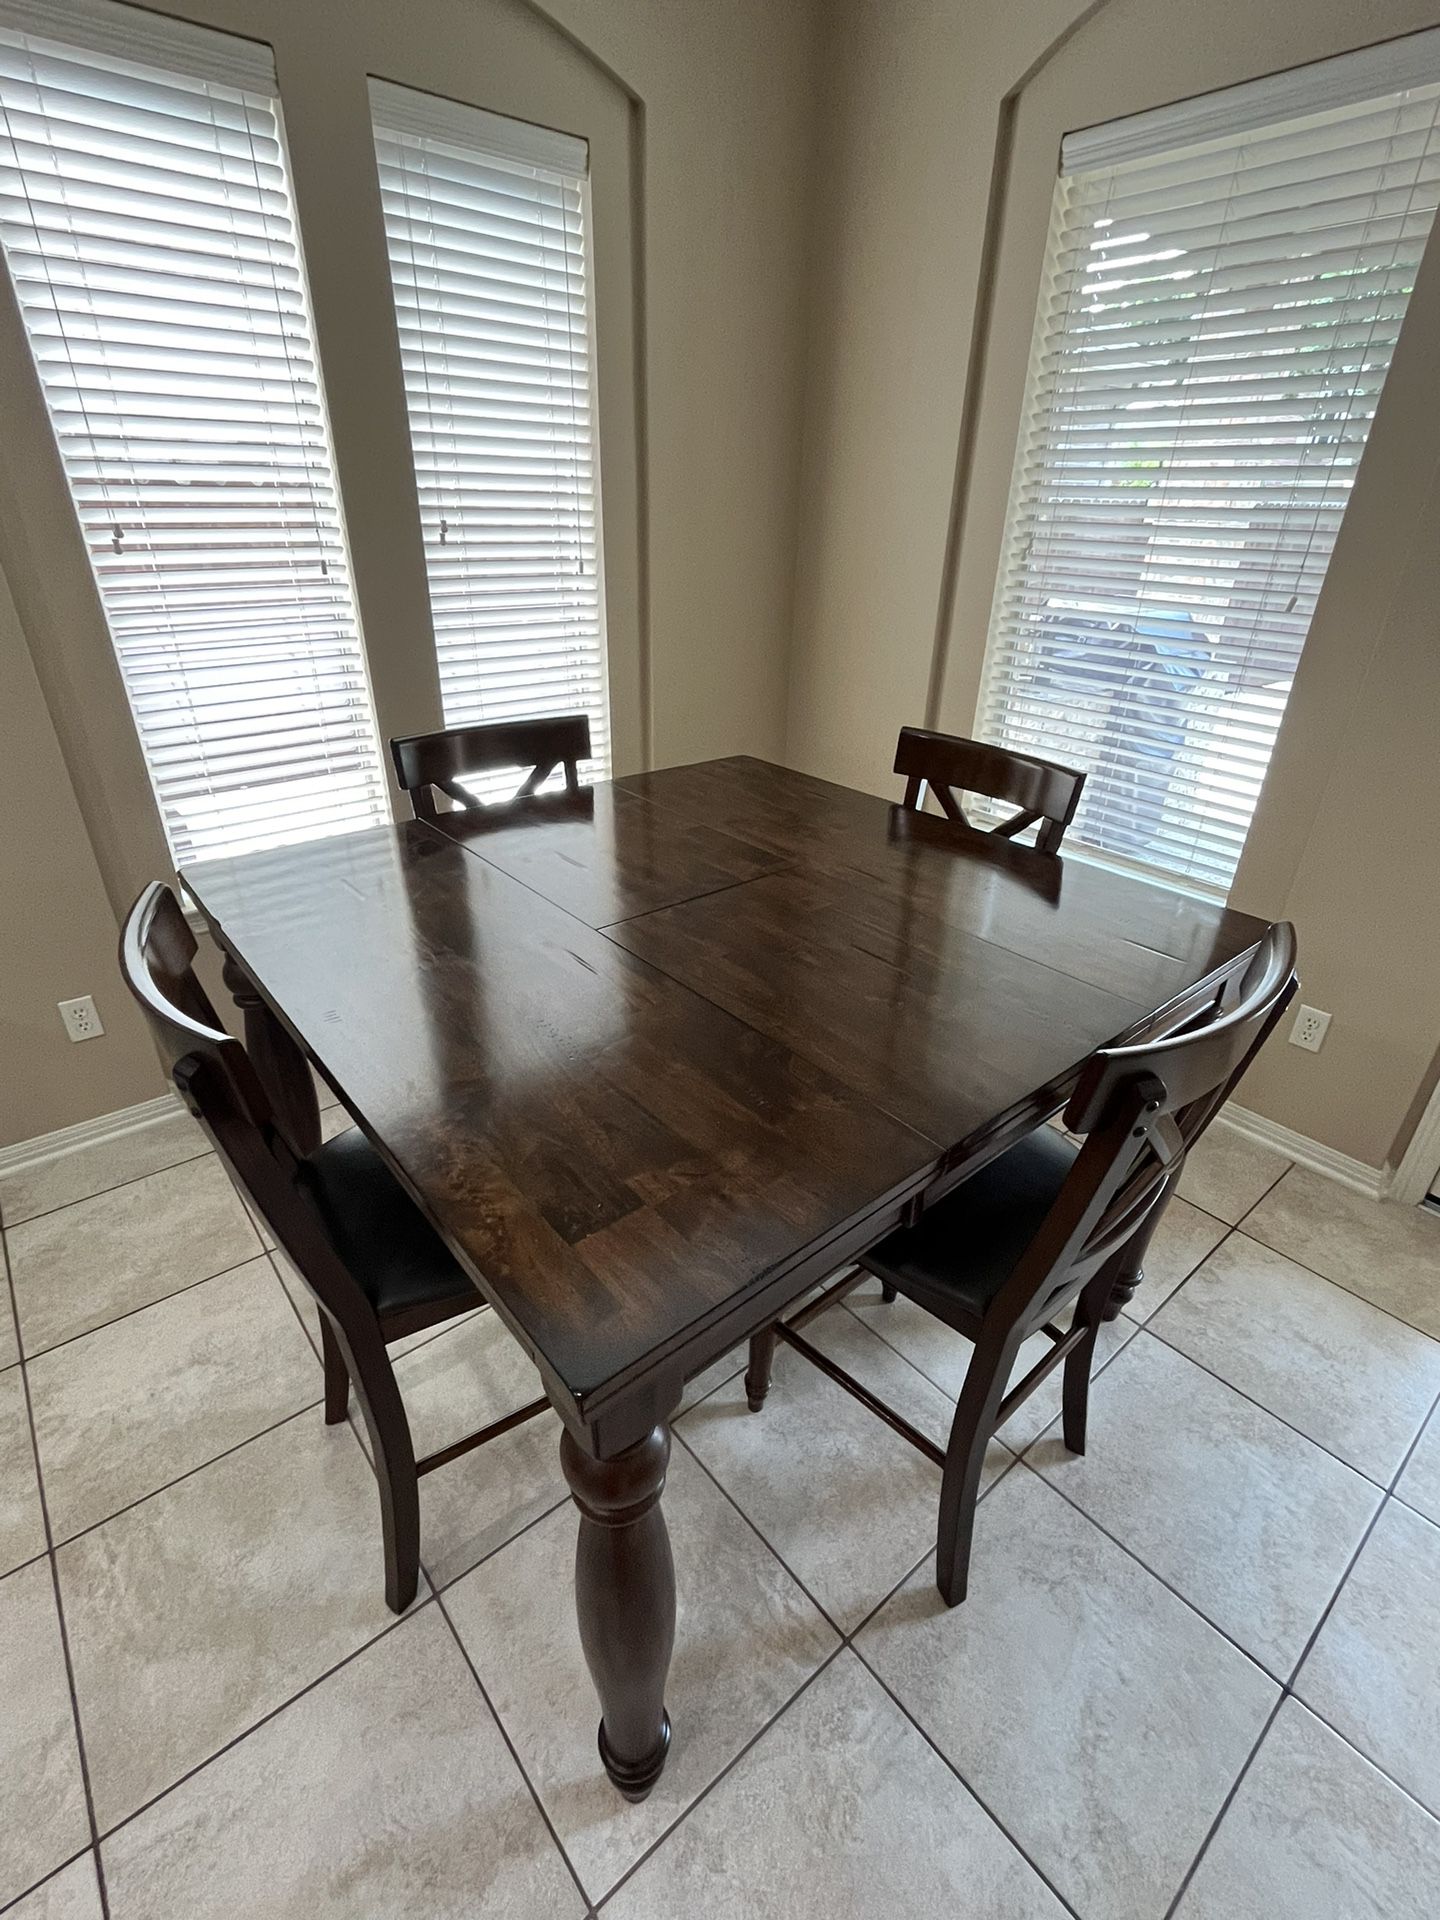 Kitchen Table Like New 54“ X 54“ With Four Stools. It Has A Self Storing Leaf.